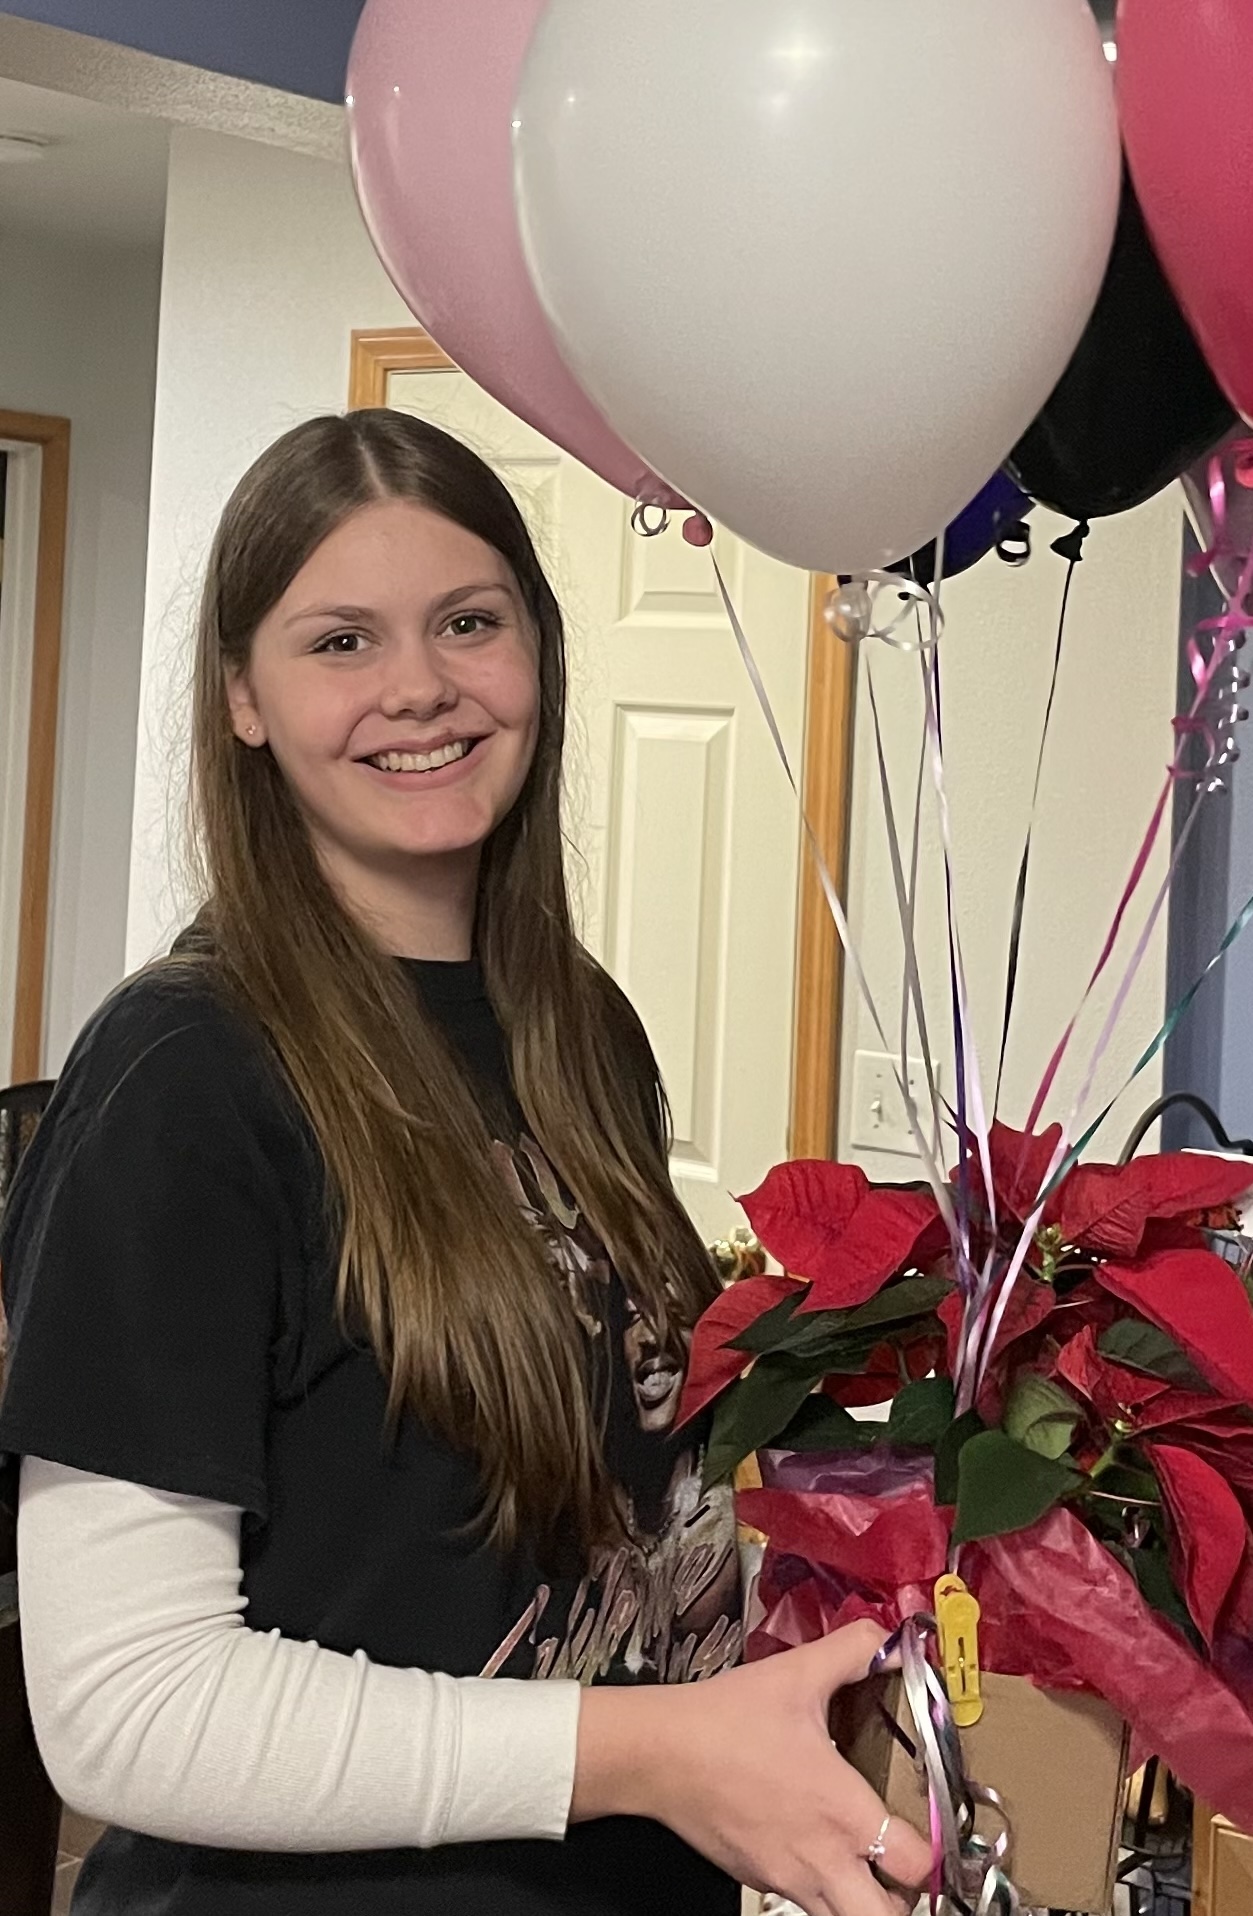 Mariah Brunn holding a bouquet of flowers and balloons